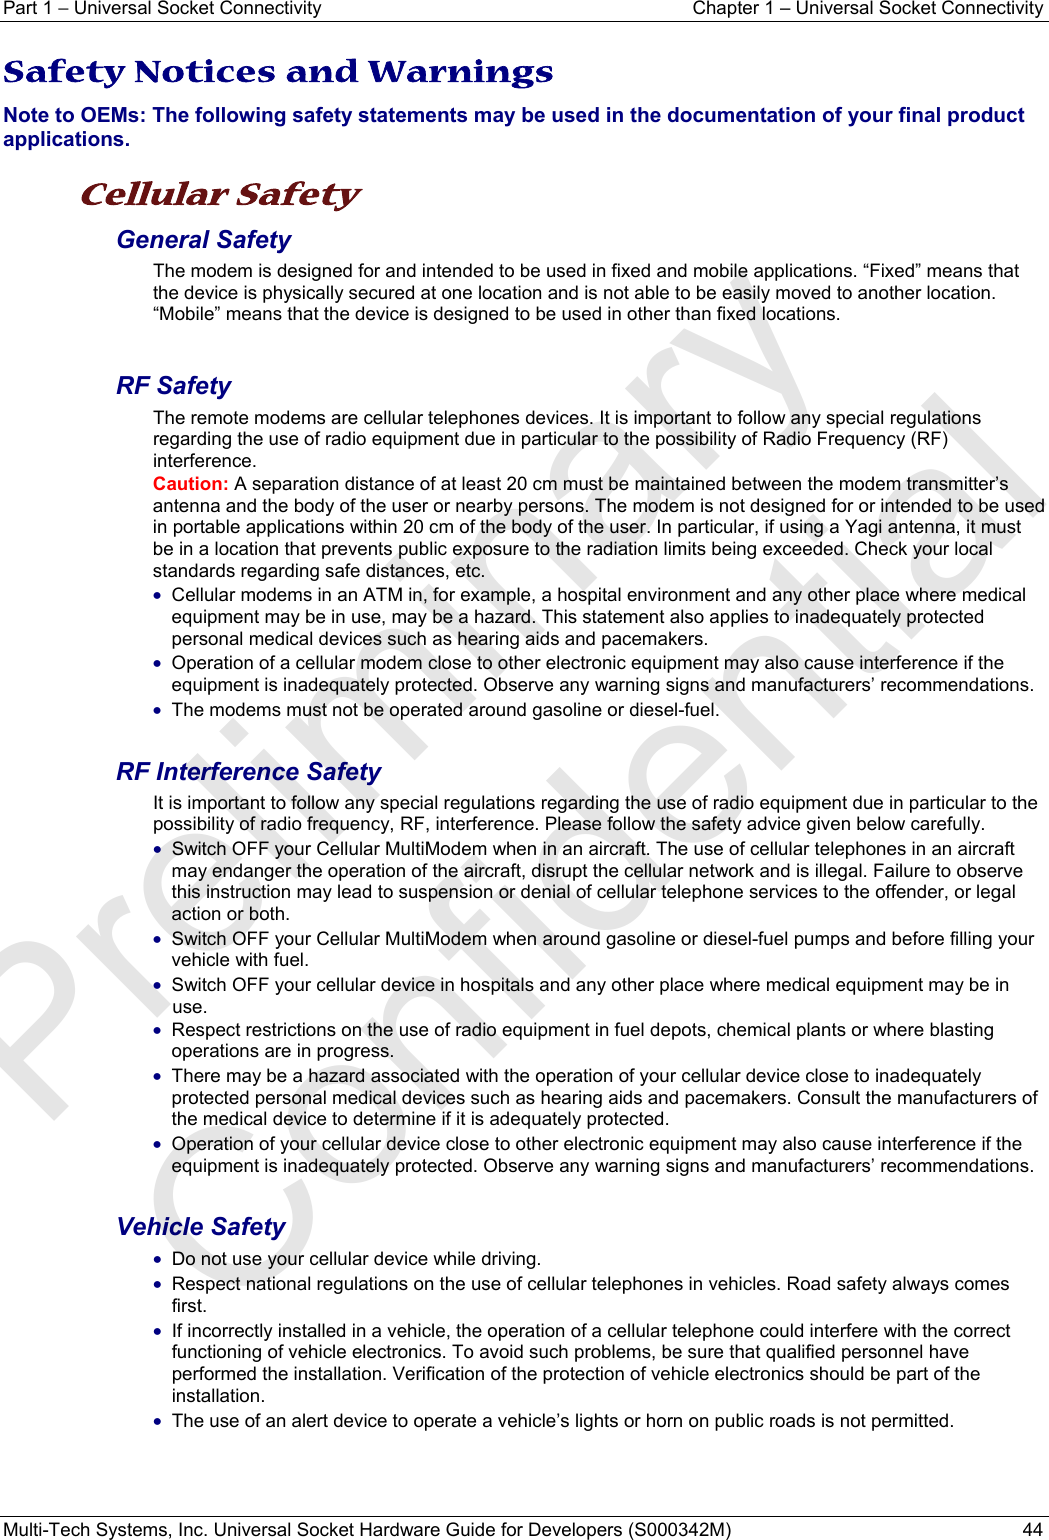 Part 1 − Universal Socket Connectivity  Chapter 1 – Universal Socket Connectivity Multi-Tech Systems, Inc. Universal Socket Hardware Guide for Developers (S000342M)  44  Safety Notices and Warnings Note to OEMs: The following safety statements may be used in the documentation of your final product applications.  Cellular Safety  General Safety The modem is designed for and intended to be used in fixed and mobile applications. “Fixed” means that the device is physically secured at one location and is not able to be easily moved to another location. “Mobile” means that the device is designed to be used in other than fixed locations.  RF Safety The remote modems are cellular telephones devices. It is important to follow any special regulations regarding the use of radio equipment due in particular to the possibility of Radio Frequency (RF) interference.  Caution: A separation distance of at least 20 cm must be maintained between the modem transmitter’s antenna and the body of the user or nearby persons. The modem is not designed for or intended to be used in portable applications within 20 cm of the body of the user. In particular, if using a Yagi antenna, it must be in a location that prevents public exposure to the radiation limits being exceeded. Check your local standards regarding safe distances, etc. • Cellular modems in an ATM in, for example, a hospital environment and any other place where medical equipment may be in use, may be a hazard. This statement also applies to inadequately protected personal medical devices such as hearing aids and pacemakers. • Operation of a cellular modem close to other electronic equipment may also cause interference if the equipment is inadequately protected. Observe any warning signs and manufacturers’ recommendations. • The modems must not be operated around gasoline or diesel-fuel.  RF Interference Safety It is important to follow any special regulations regarding the use of radio equipment due in particular to the possibility of radio frequency, RF, interference. Please follow the safety advice given below carefully. • Switch OFF your Cellular MultiModem when in an aircraft. The use of cellular telephones in an aircraft may endanger the operation of the aircraft, disrupt the cellular network and is illegal. Failure to observe this instruction may lead to suspension or denial of cellular telephone services to the offender, or legal action or both. • Switch OFF your Cellular MultiModem when around gasoline or diesel-fuel pumps and before filling your vehicle with fuel. • Switch OFF your cellular device in hospitals and any other place where medical equipment may be in use. • Respect restrictions on the use of radio equipment in fuel depots, chemical plants or where blasting operations are in progress. • There may be a hazard associated with the operation of your cellular device close to inadequately protected personal medical devices such as hearing aids and pacemakers. Consult the manufacturers of the medical device to determine if it is adequately protected. • Operation of your cellular device close to other electronic equipment may also cause interference if the equipment is inadequately protected. Observe any warning signs and manufacturers’ recommendations.  Vehicle Safety • Do not use your cellular device while driving. • Respect national regulations on the use of cellular telephones in vehicles. Road safety always comes first. • If incorrectly installed in a vehicle, the operation of a cellular telephone could interfere with the correct functioning of vehicle electronics. To avoid such problems, be sure that qualified personnel have performed the installation. Verification of the protection of vehicle electronics should be part of the installation. • The use of an alert device to operate a vehicle’s lights or horn on public roads is not permitted.    Preliminary  Confidential